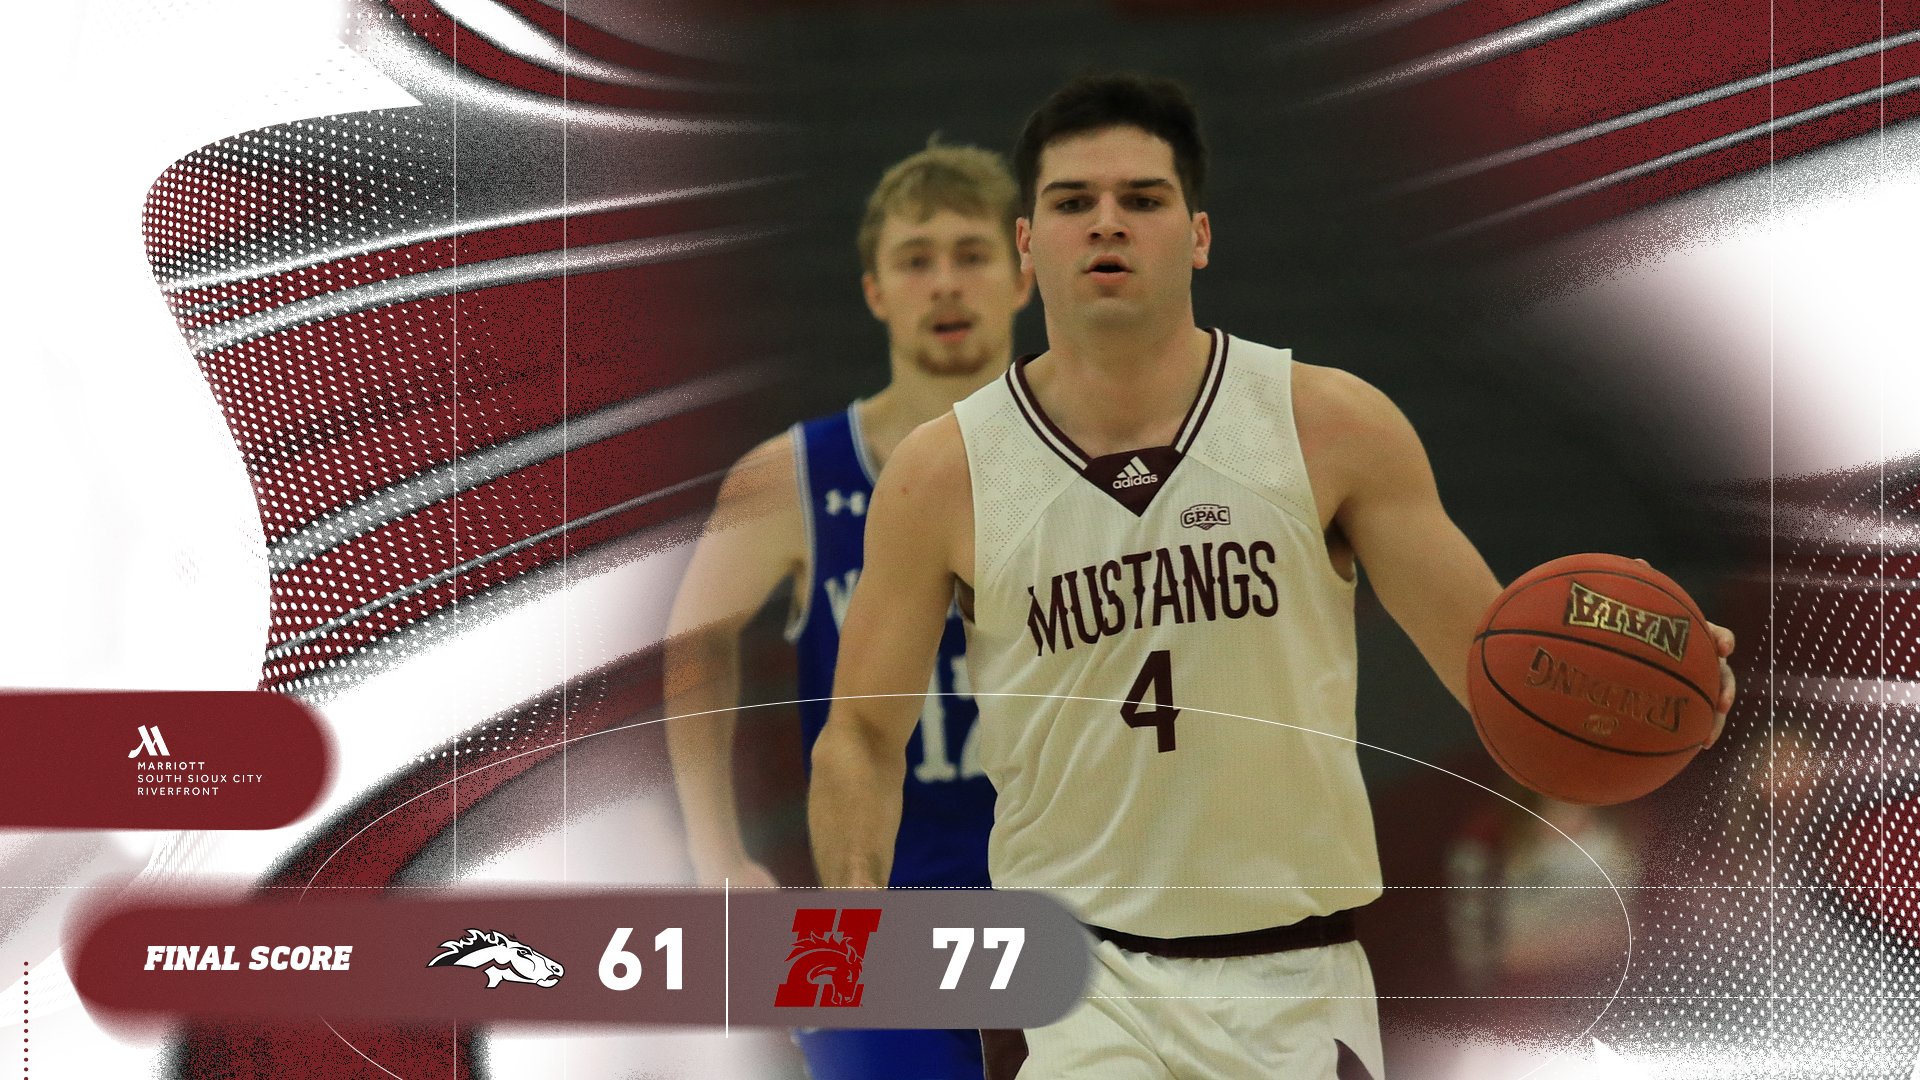 Mustangs unable to overcome first-half deficit, fall 77-66 at Hastings